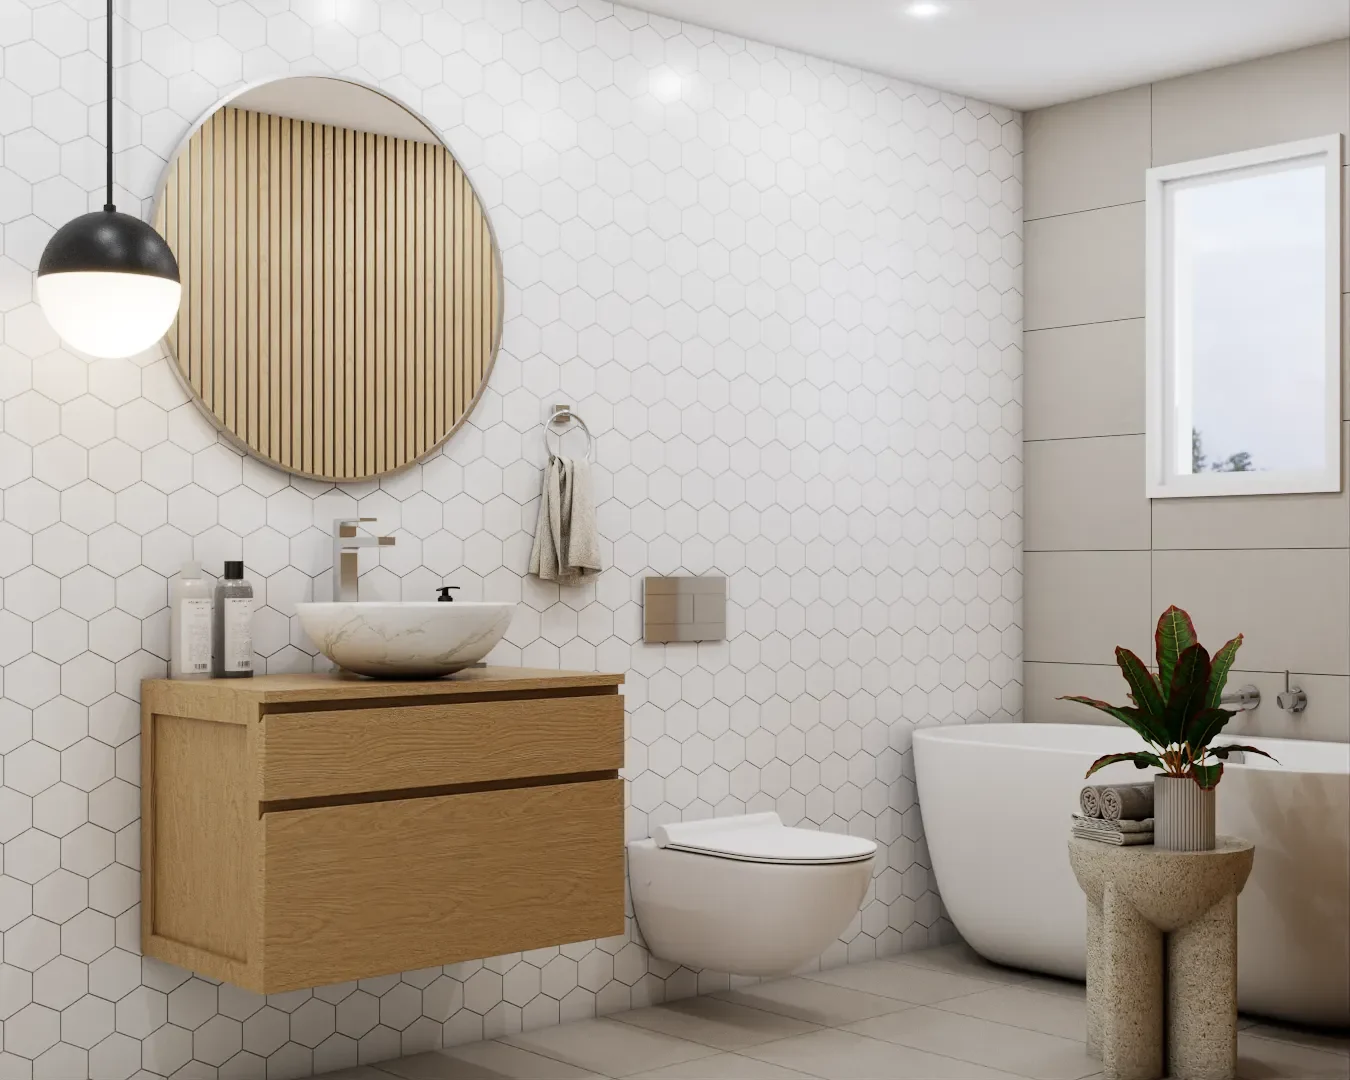 Chic bathroom with eye-catching hexagonal tiles and wooden vanity, complemented by modern fixtures and clean, crisp lines. Design by Debora, an online interior design service